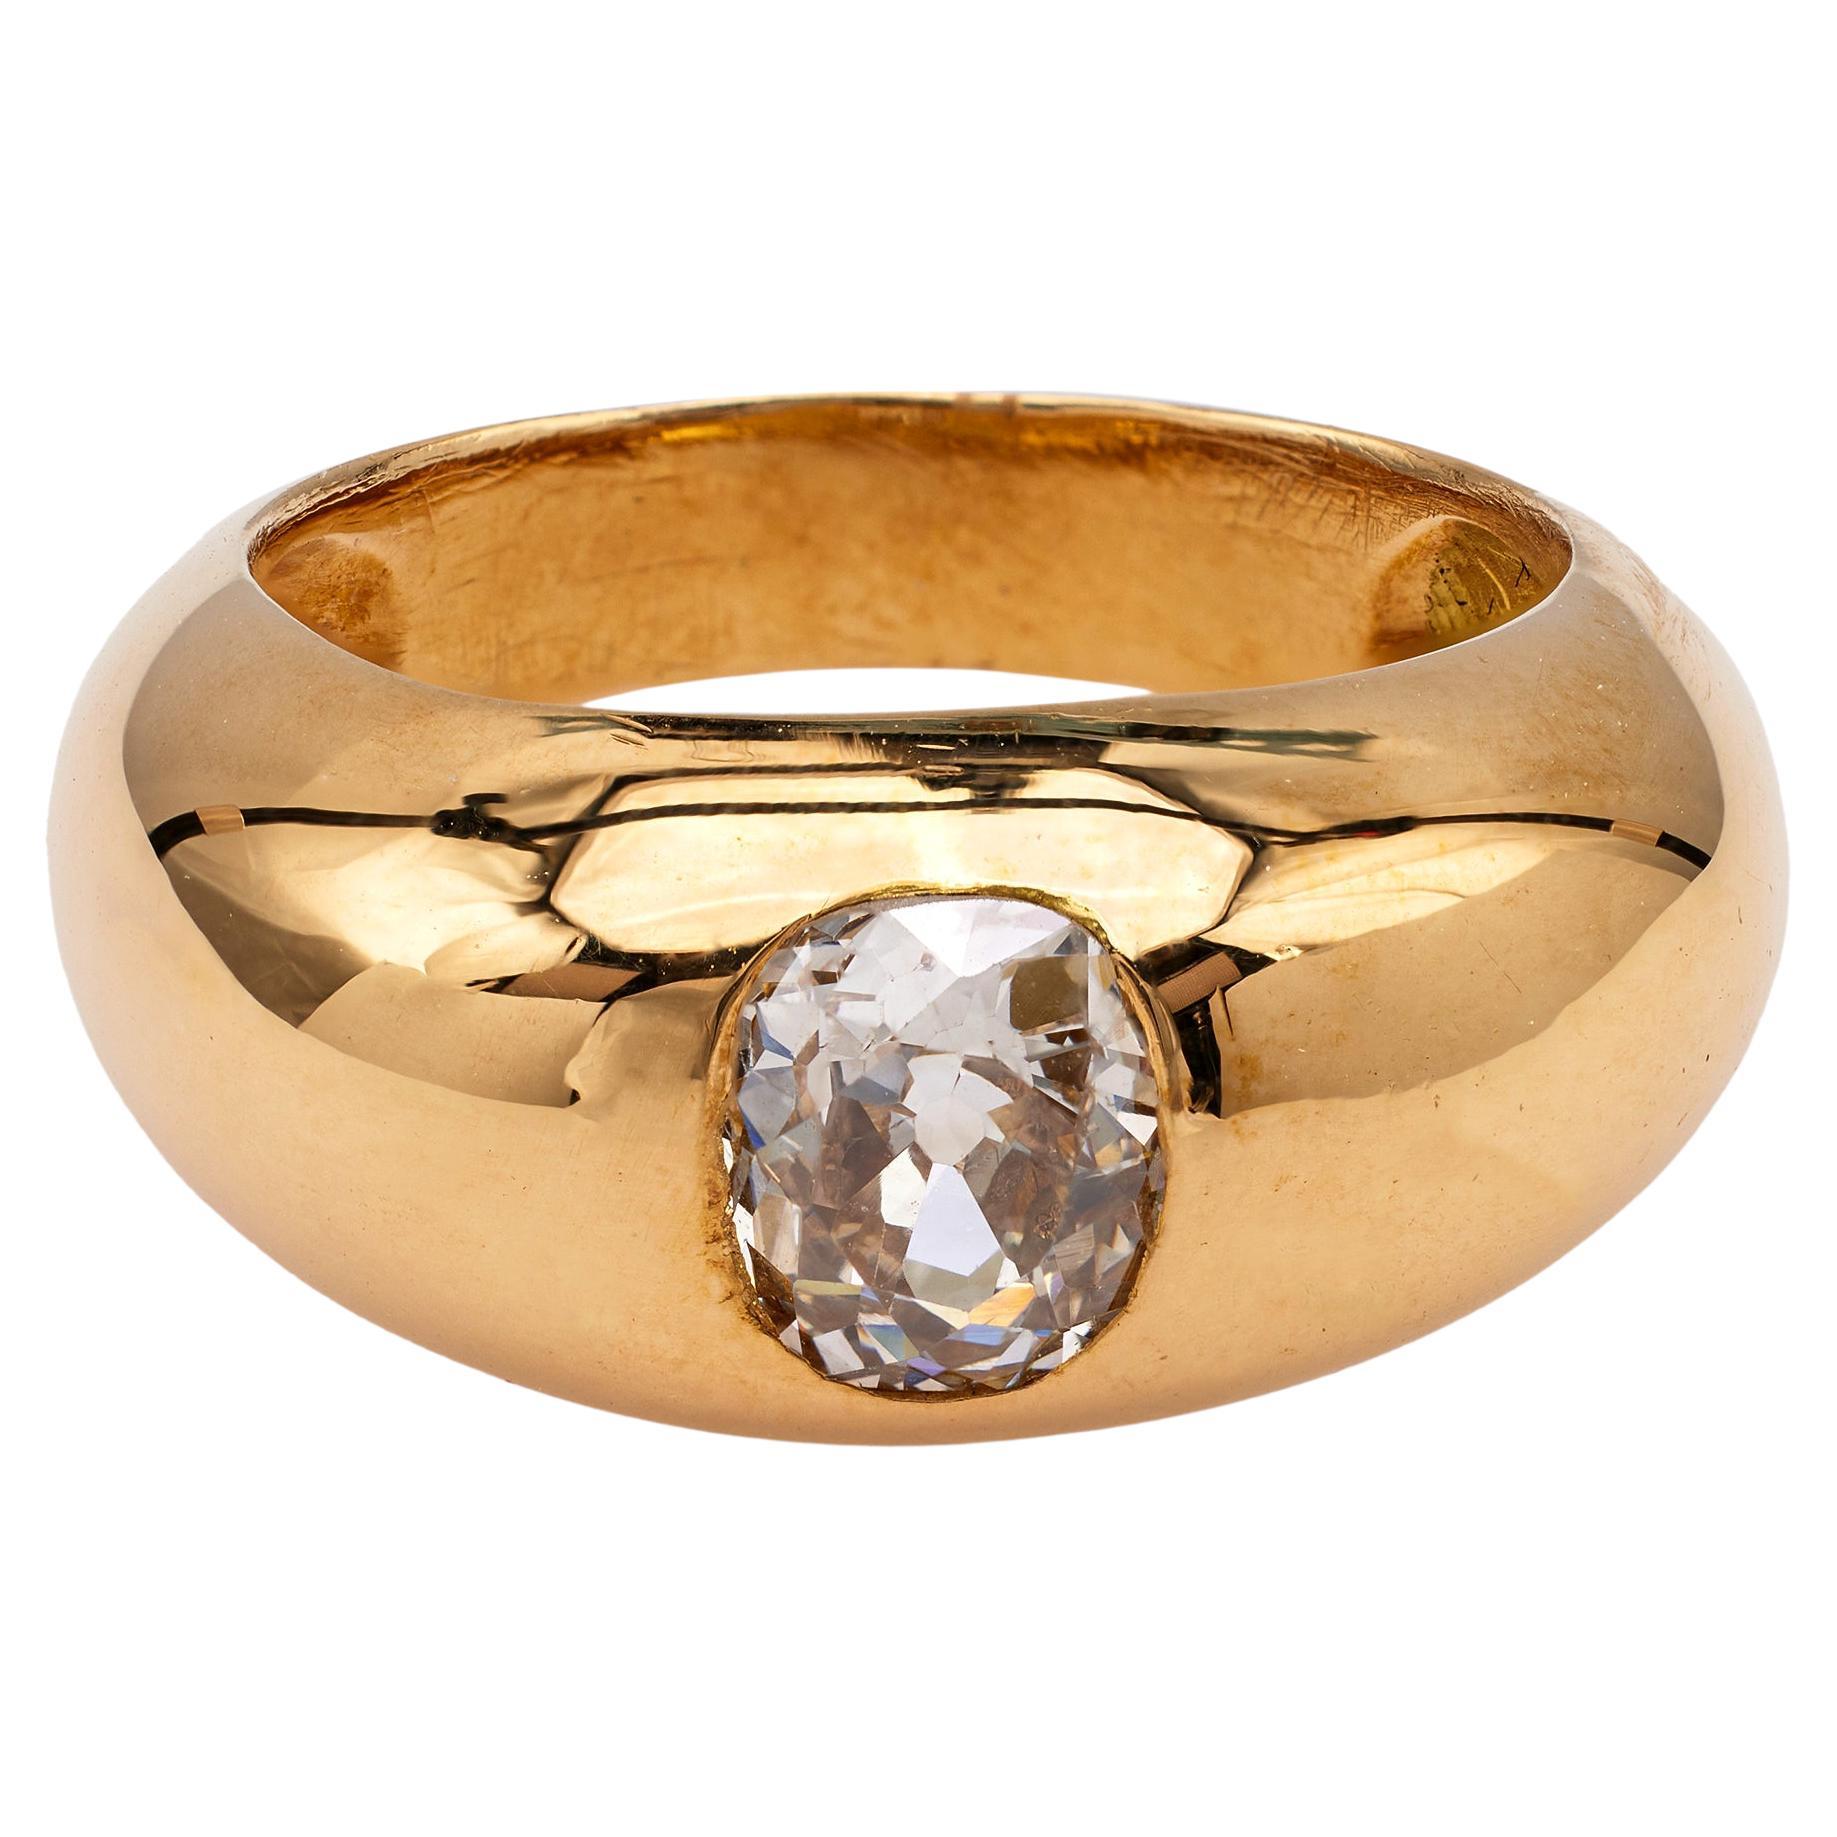 Vintage French Old Mine Cut Diamond 18k Yellow Gold Dome Ring